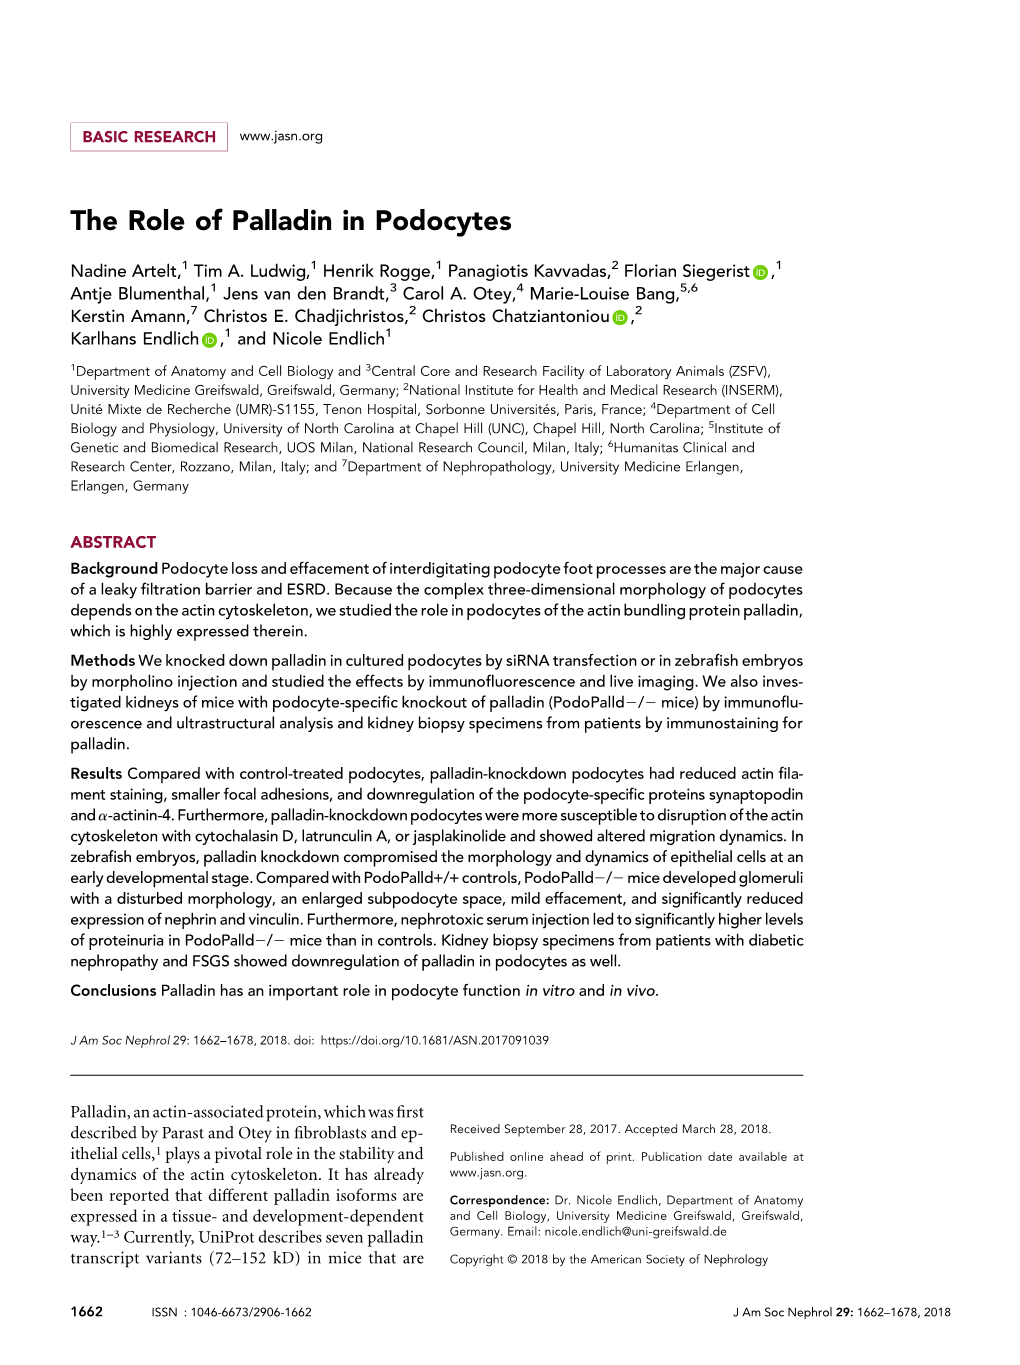 The Role of Palladin in Podocytes